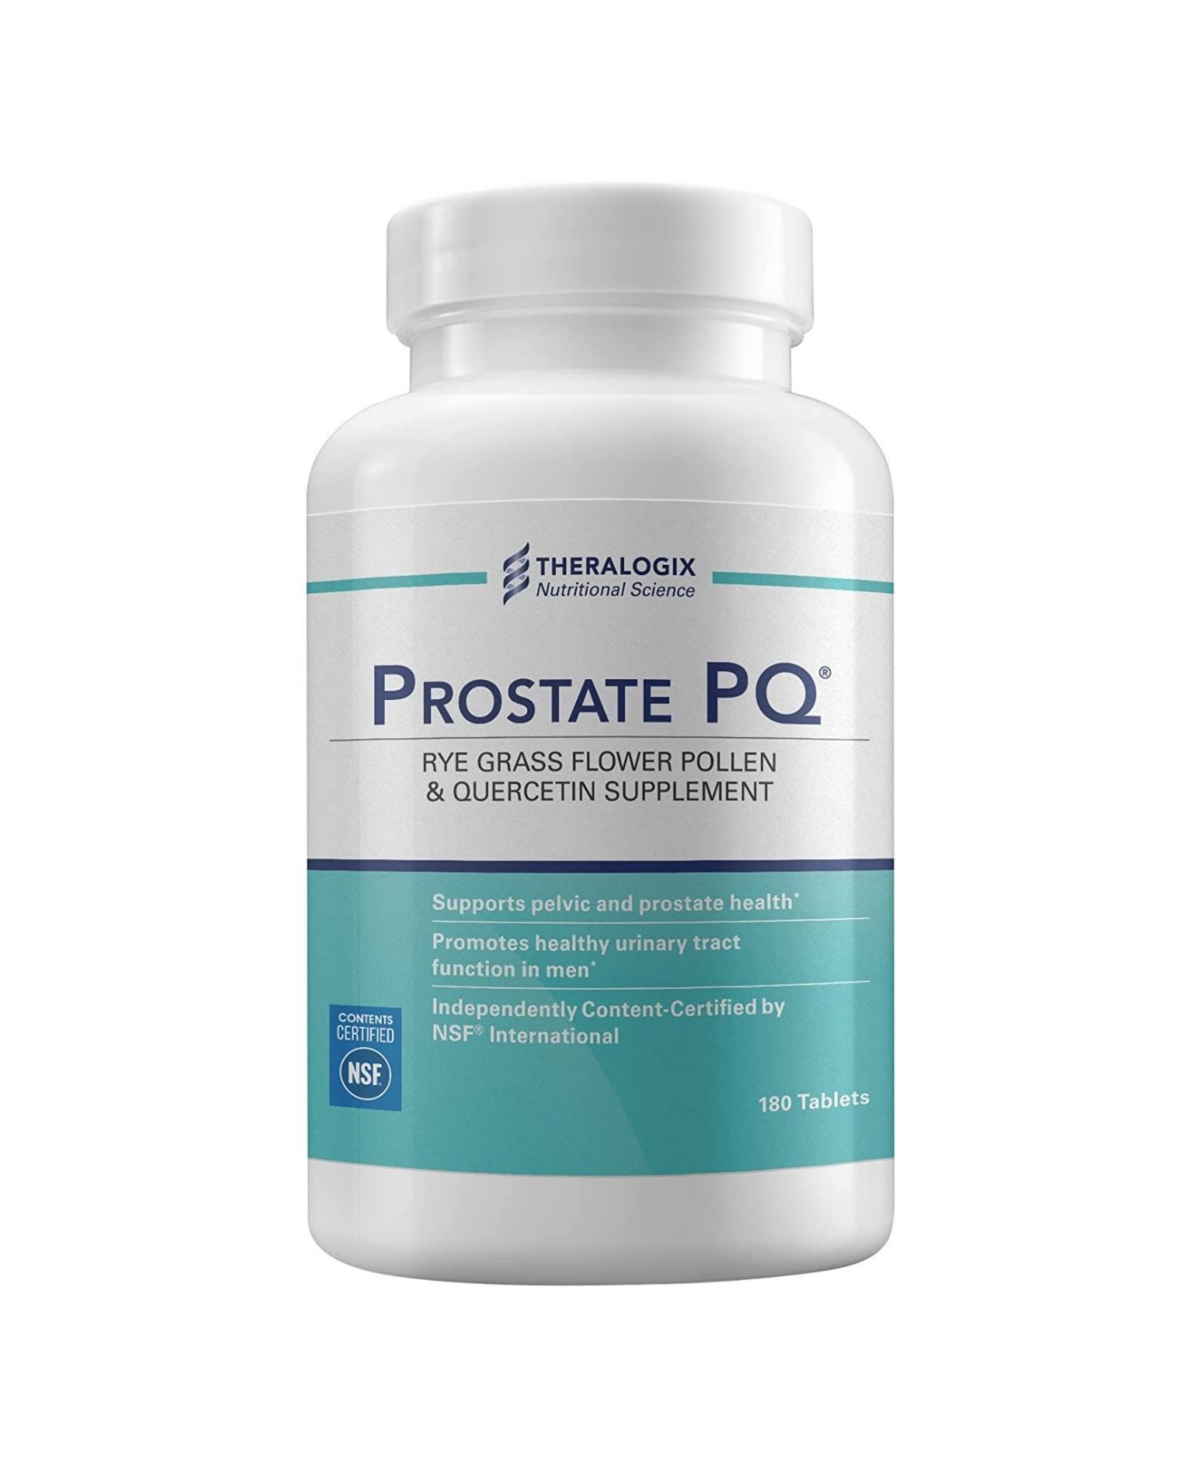 Prostate Pq Rye Grass Pollen Extract Supplement with Quercetin - Open Miscellaneous